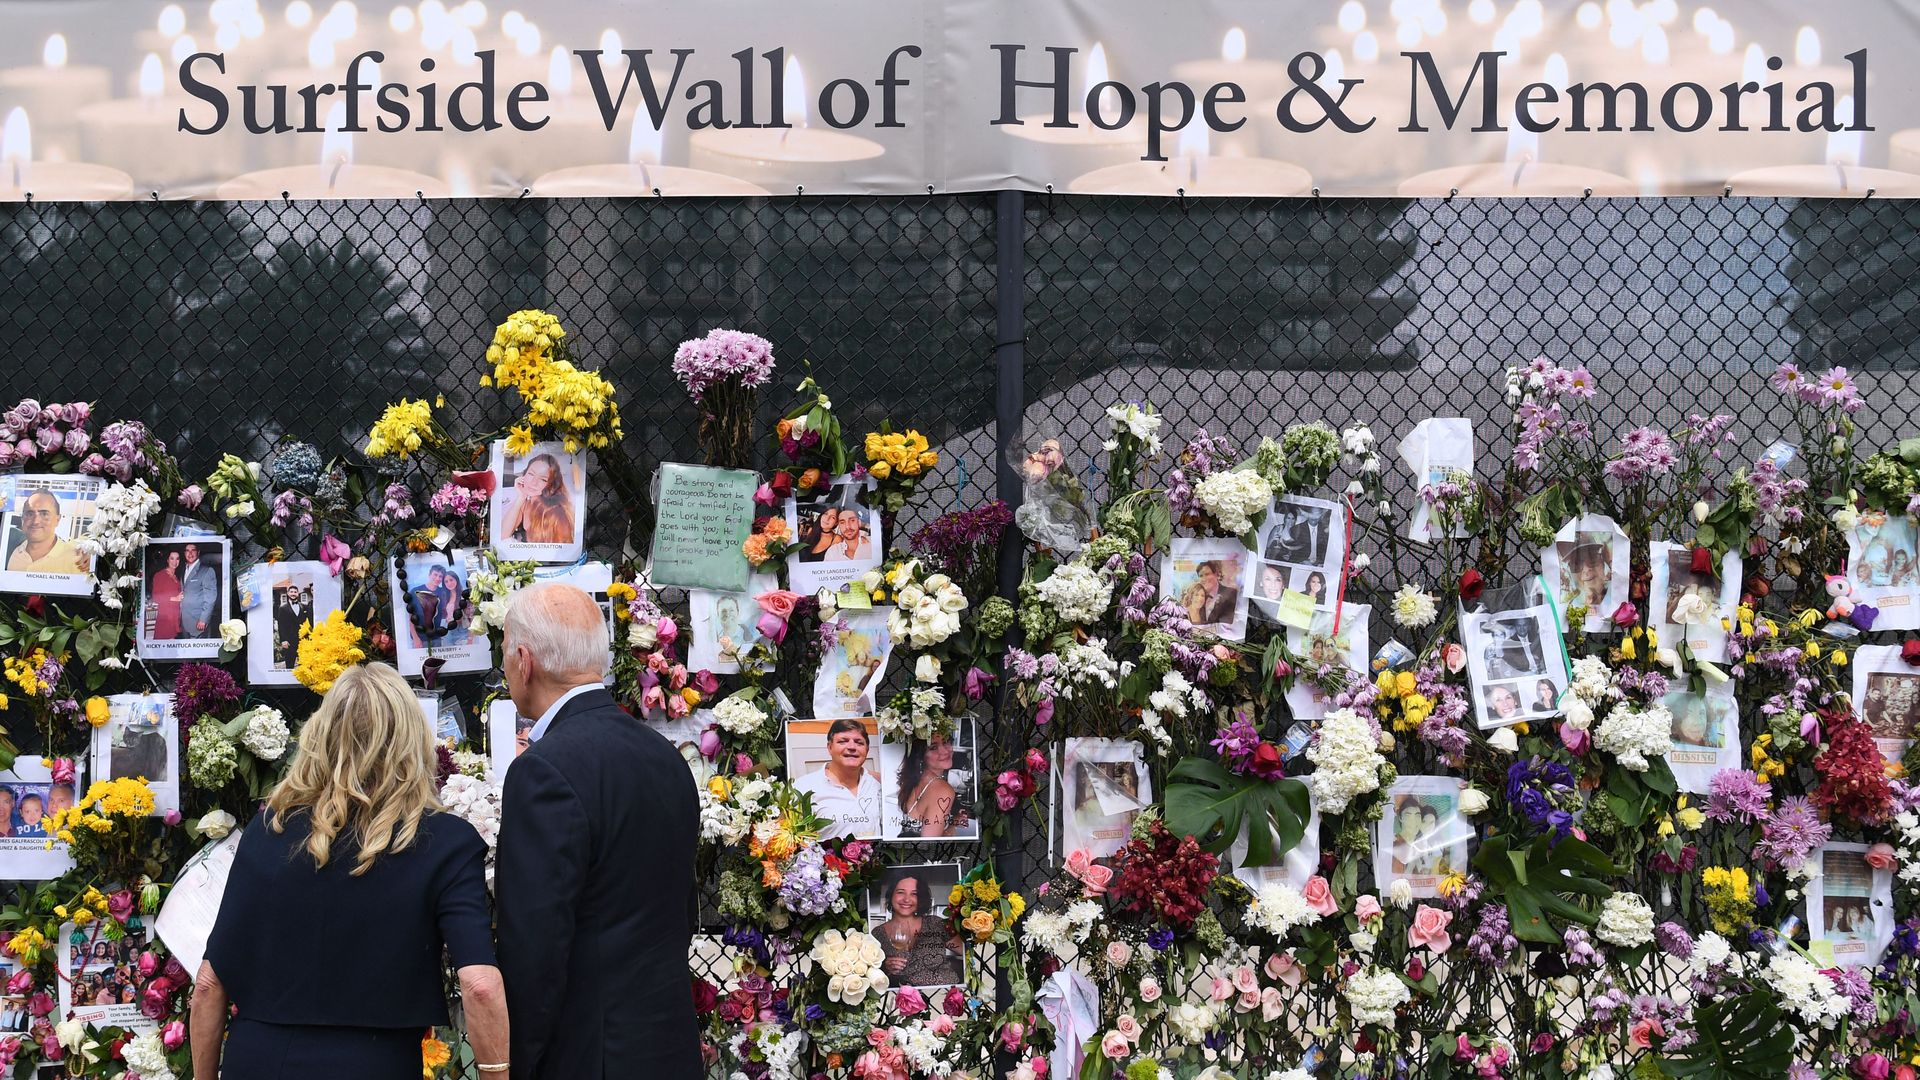 Joe and Jill Biden visit a photo wall, the 'Surfside Wall of Hope & Memorial', near the partially collapsed condo building 